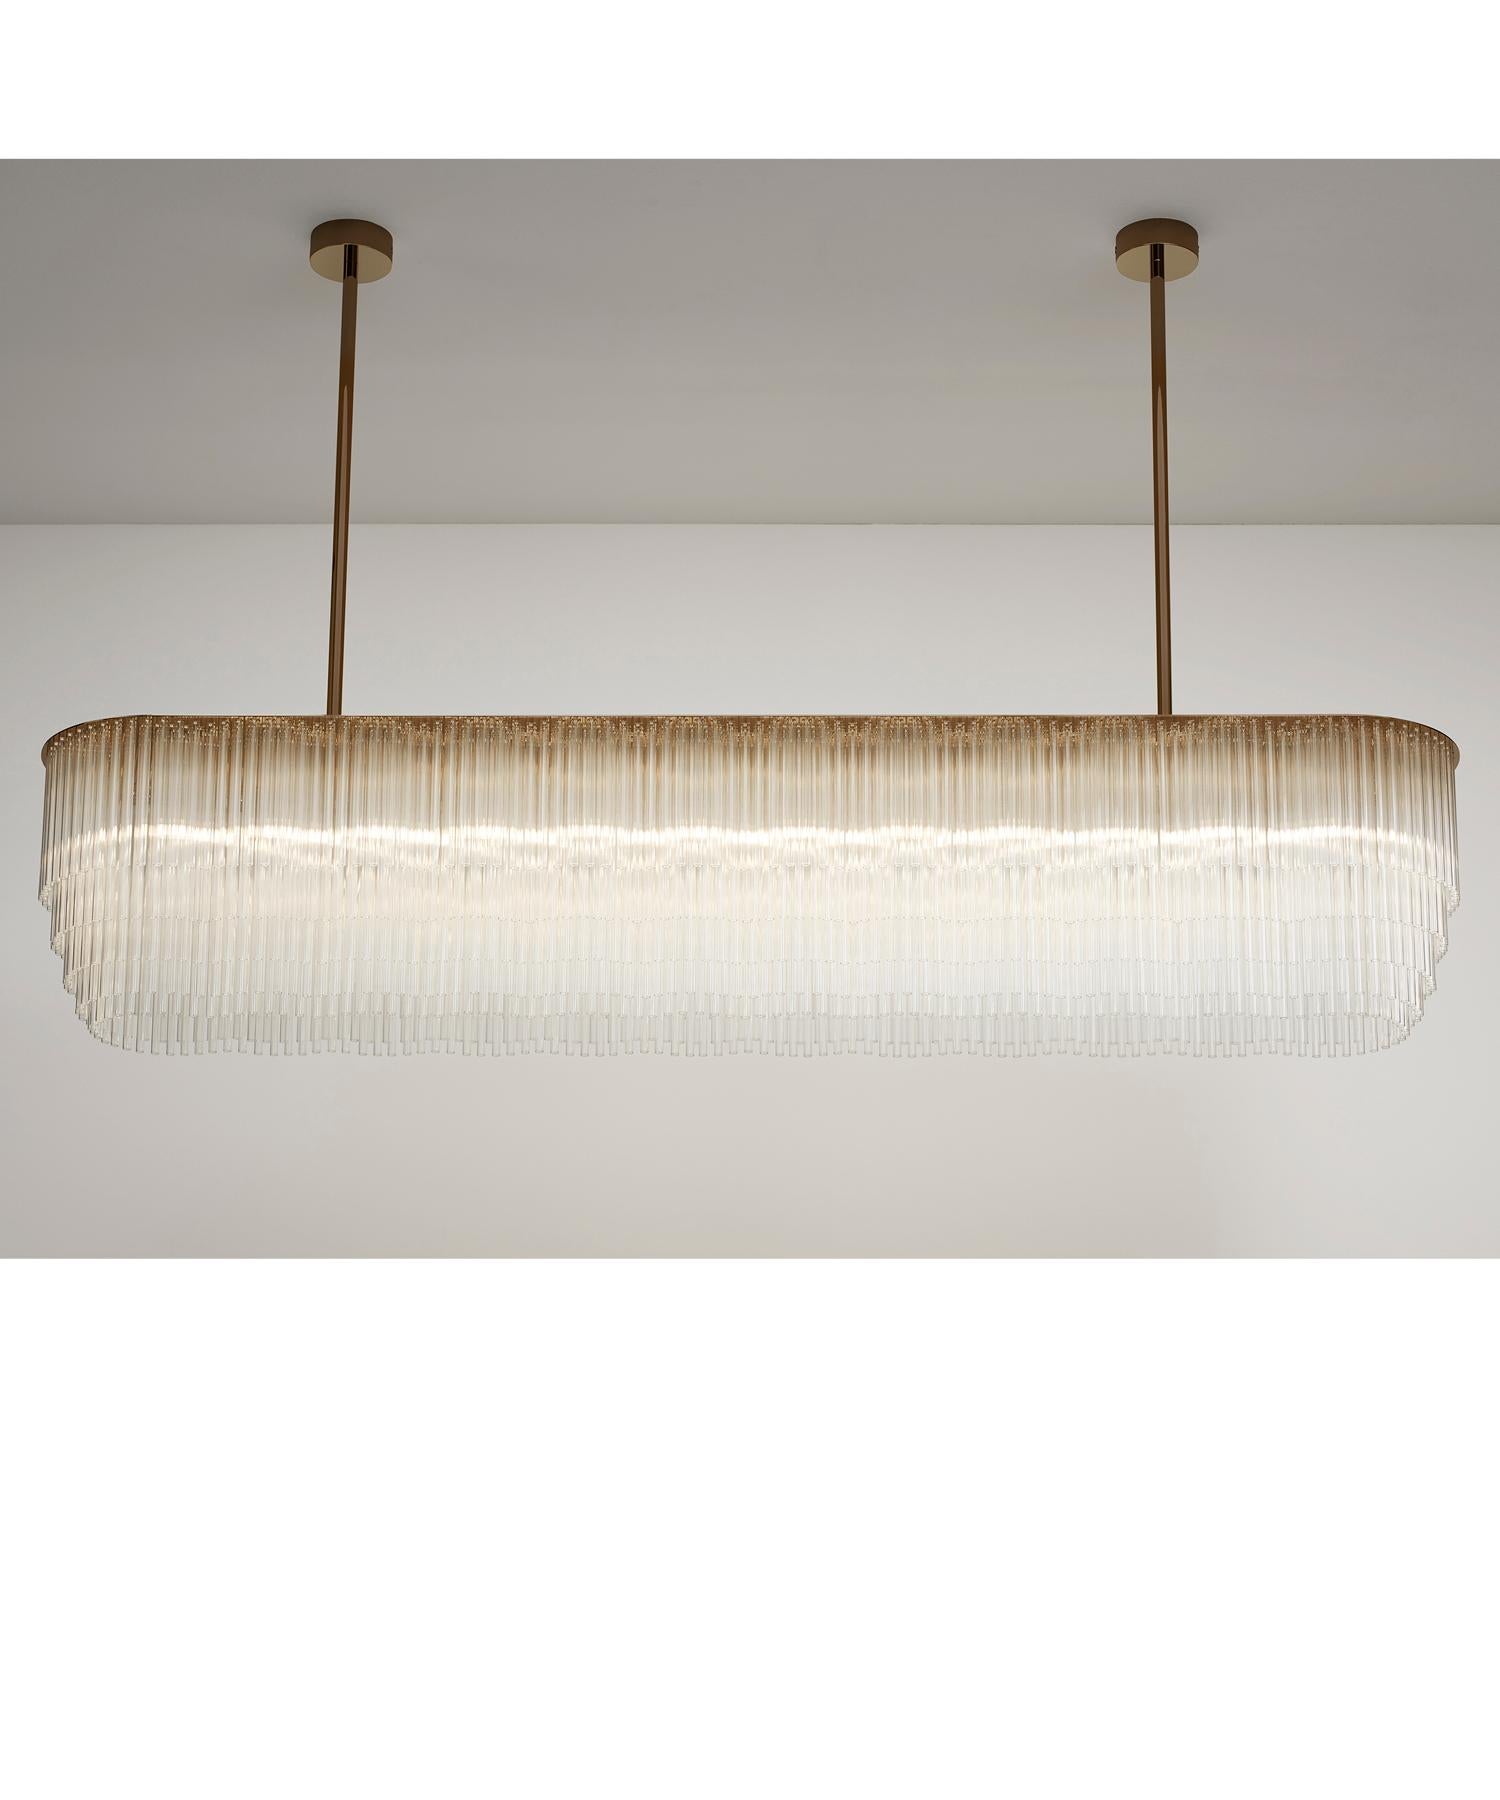 The Linear Chandelier, with its distinguished tiered-glass profile is the perfect solution for interiors that require a contemporary and functional source of light. It sits beautifully when suspended over dining tables or as a decorative accent in a